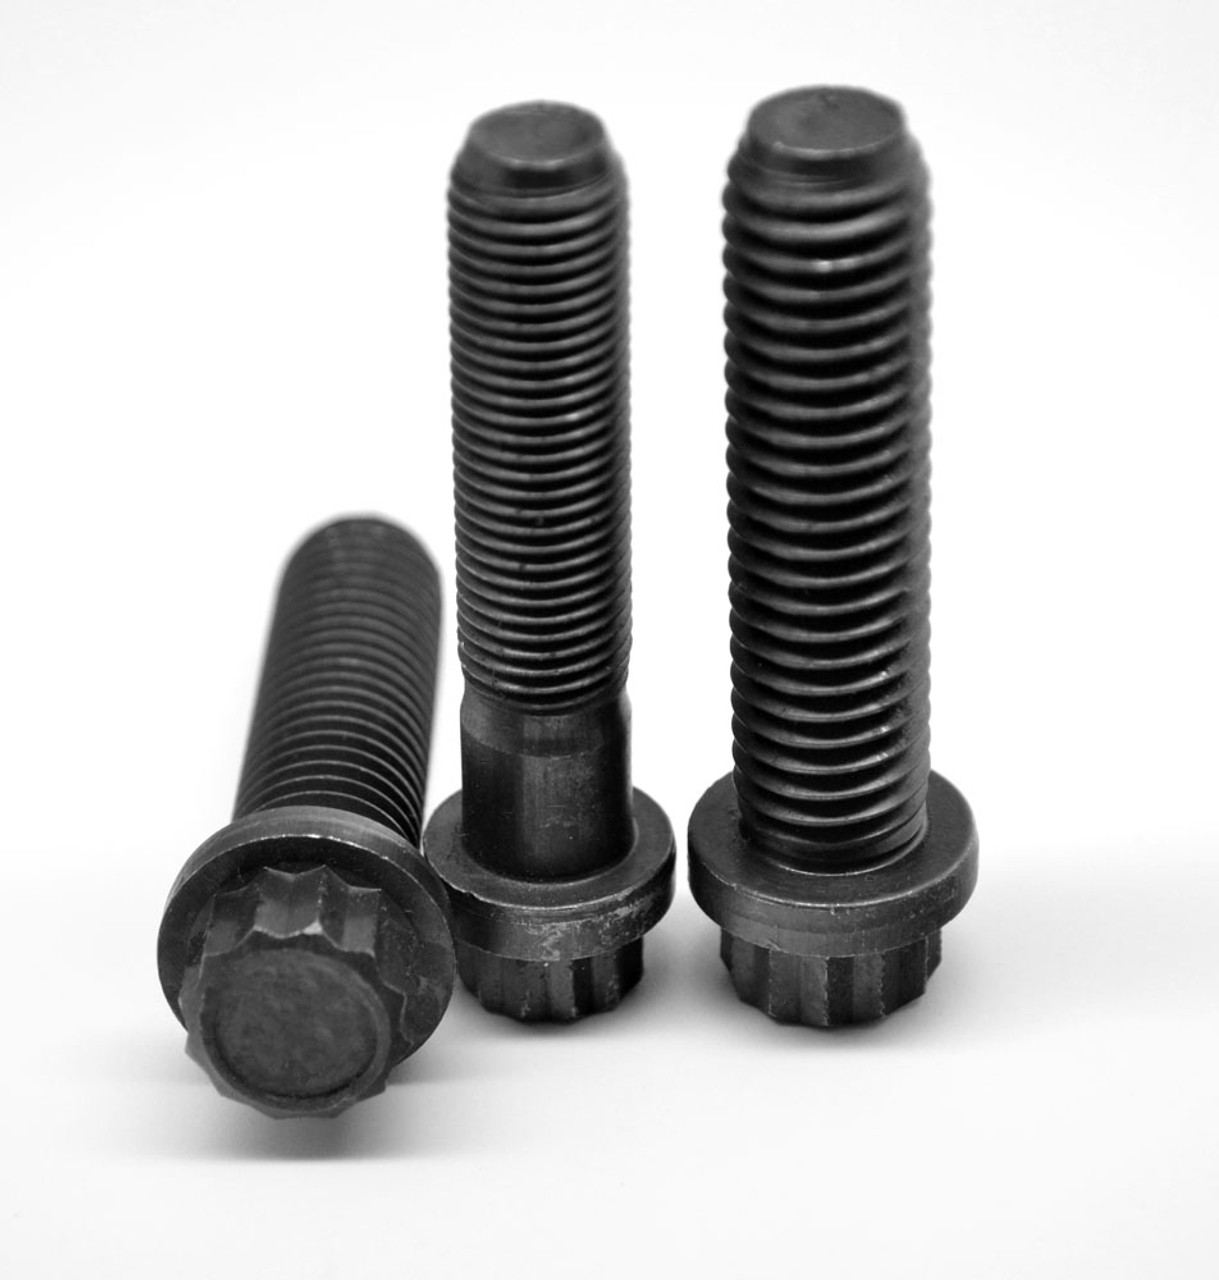 3/4-10 x 1 1/2 Coarse Thread 12-Point Flange Screw Alloy Steel Thermal Black Oxide